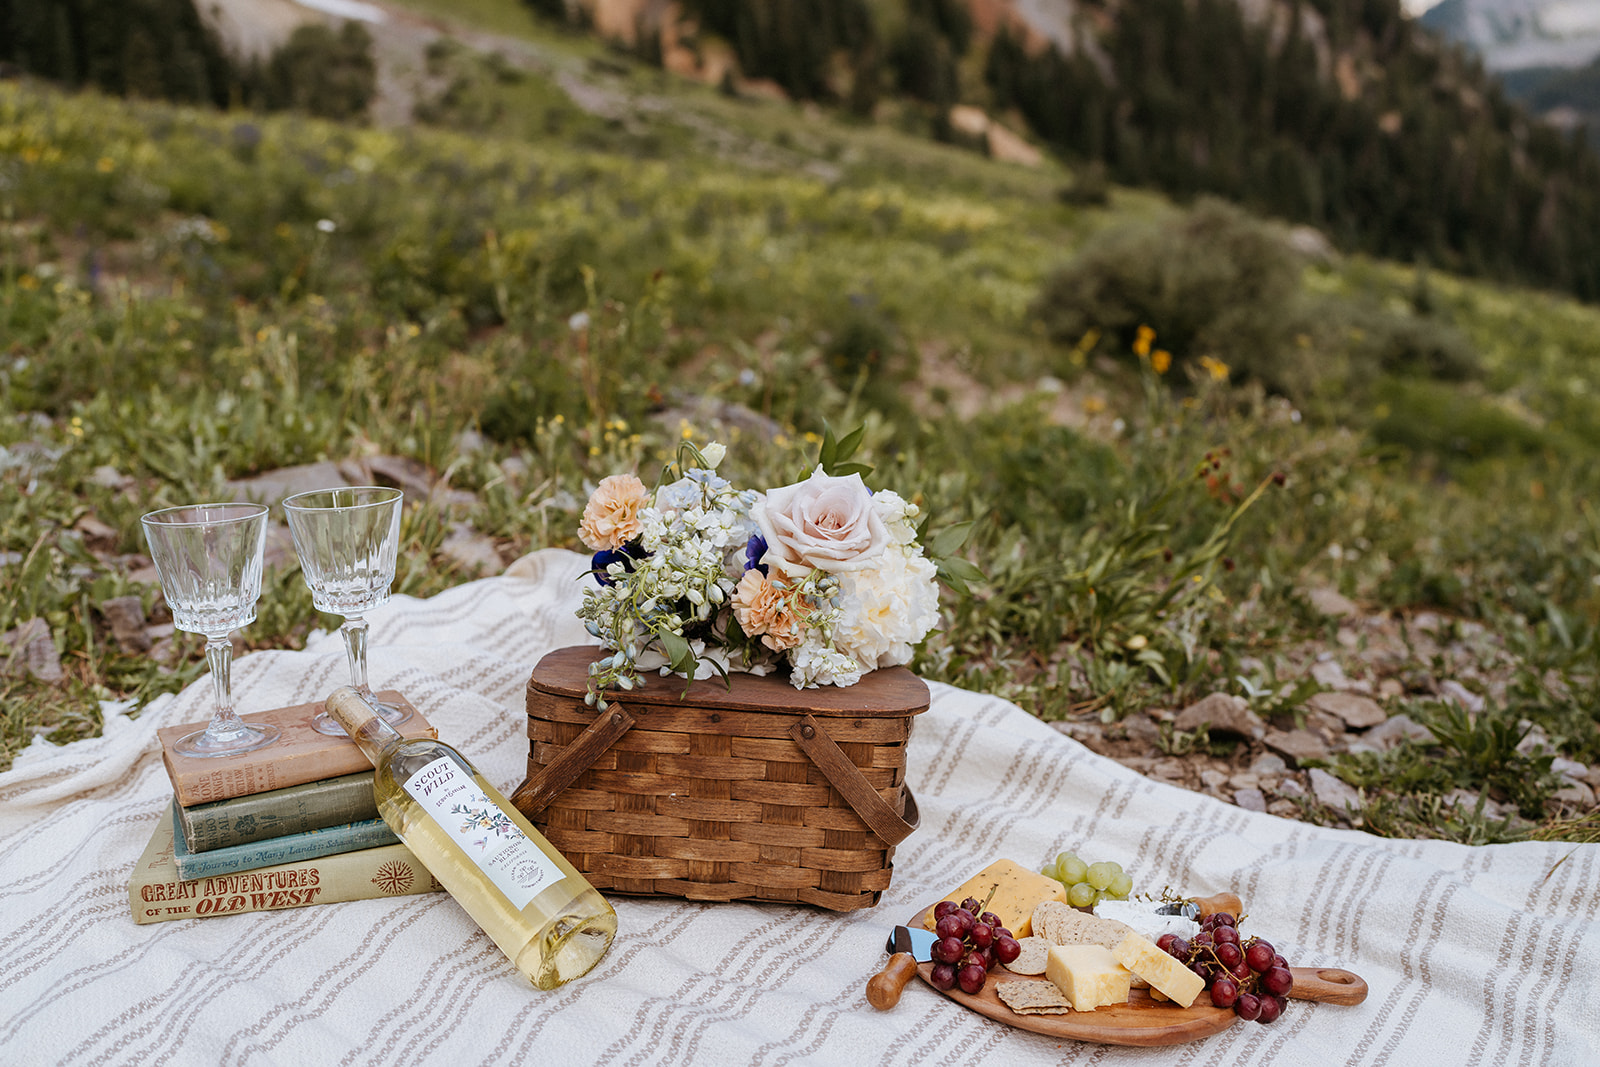 Details of a wedding picnic with wine and a cheese plate